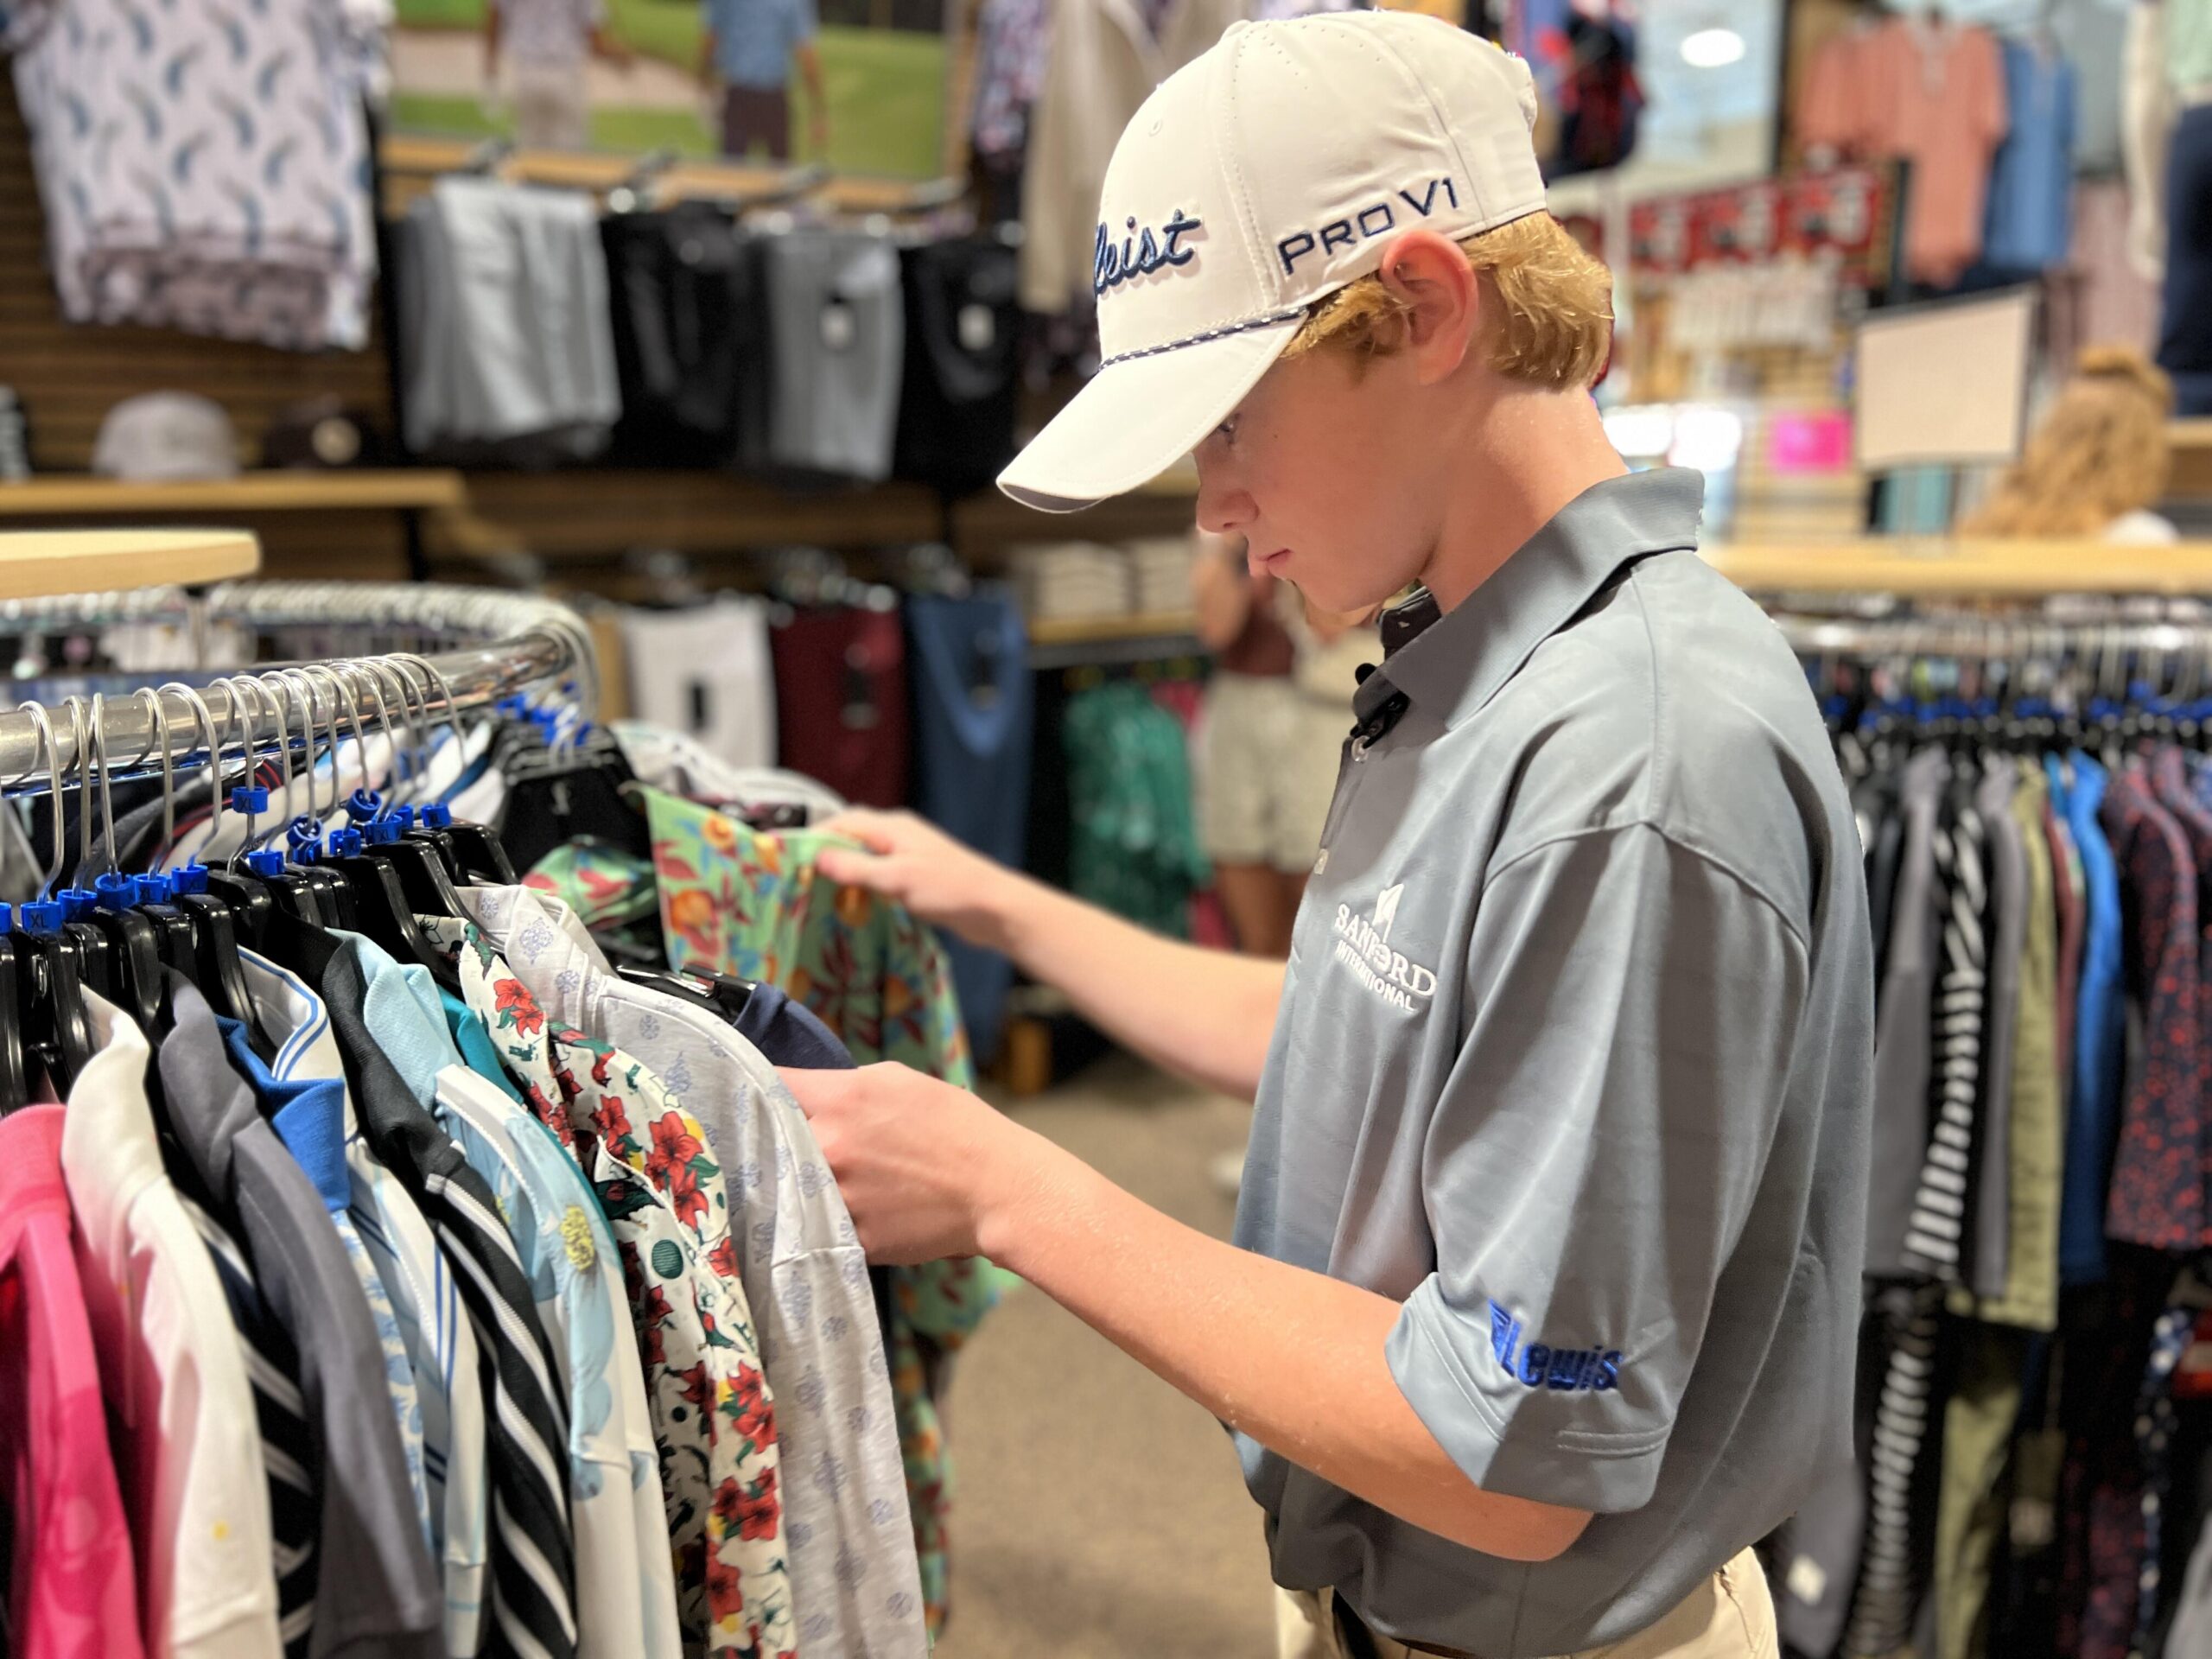 Teen boy sifts through a rack of shirts at a sporting goods store.